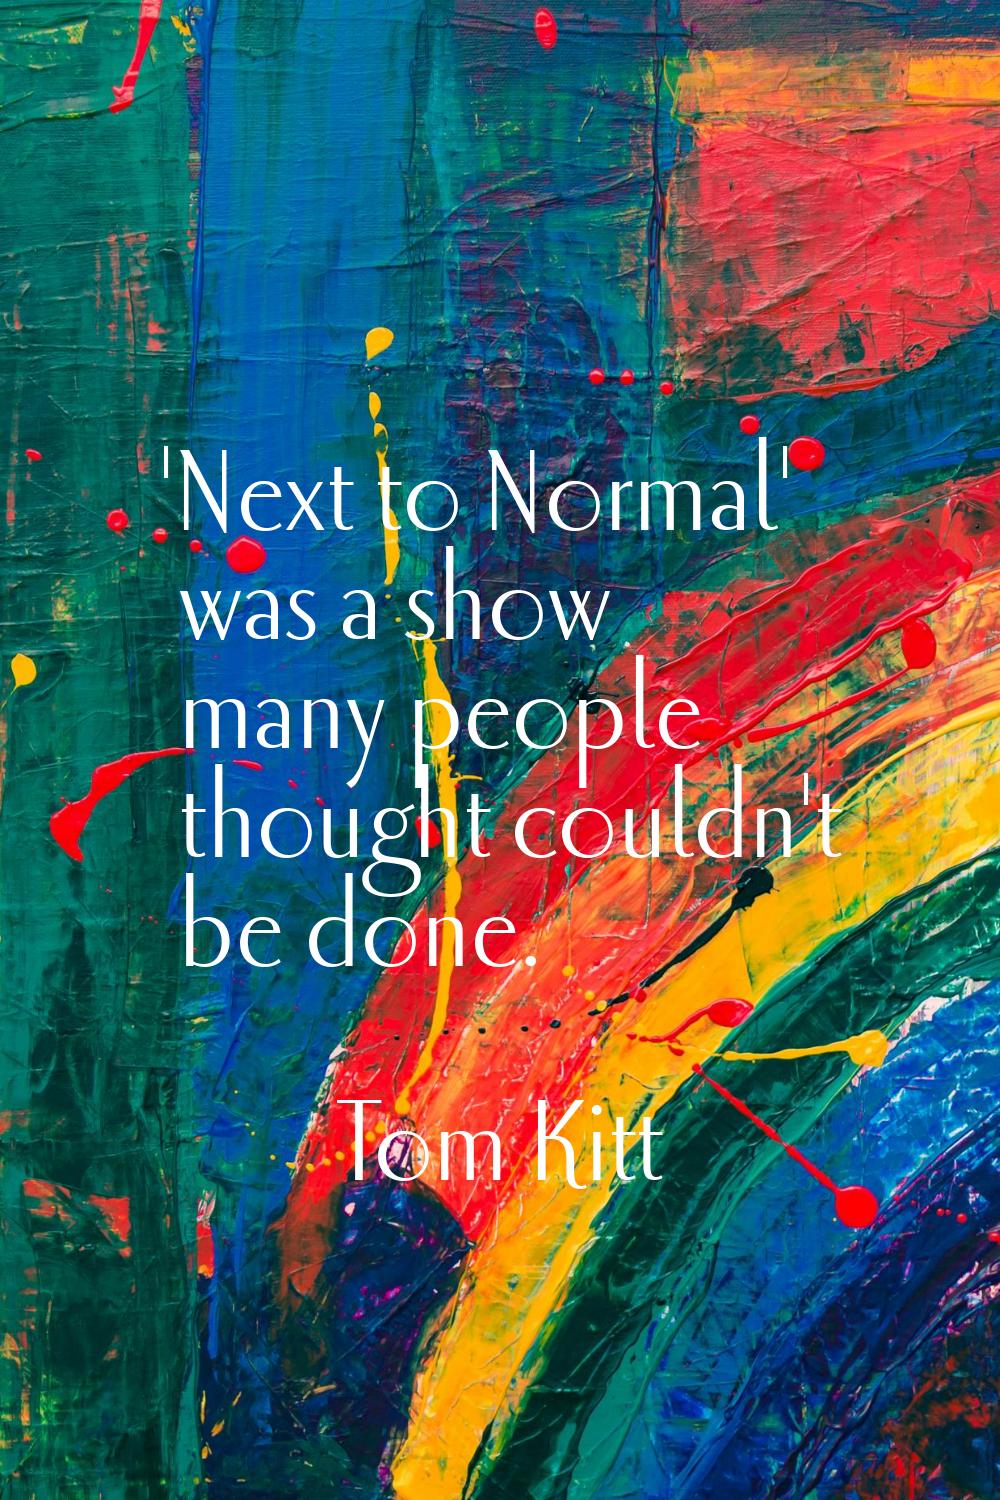 'Next to Normal' was a show many people thought couldn't be done.